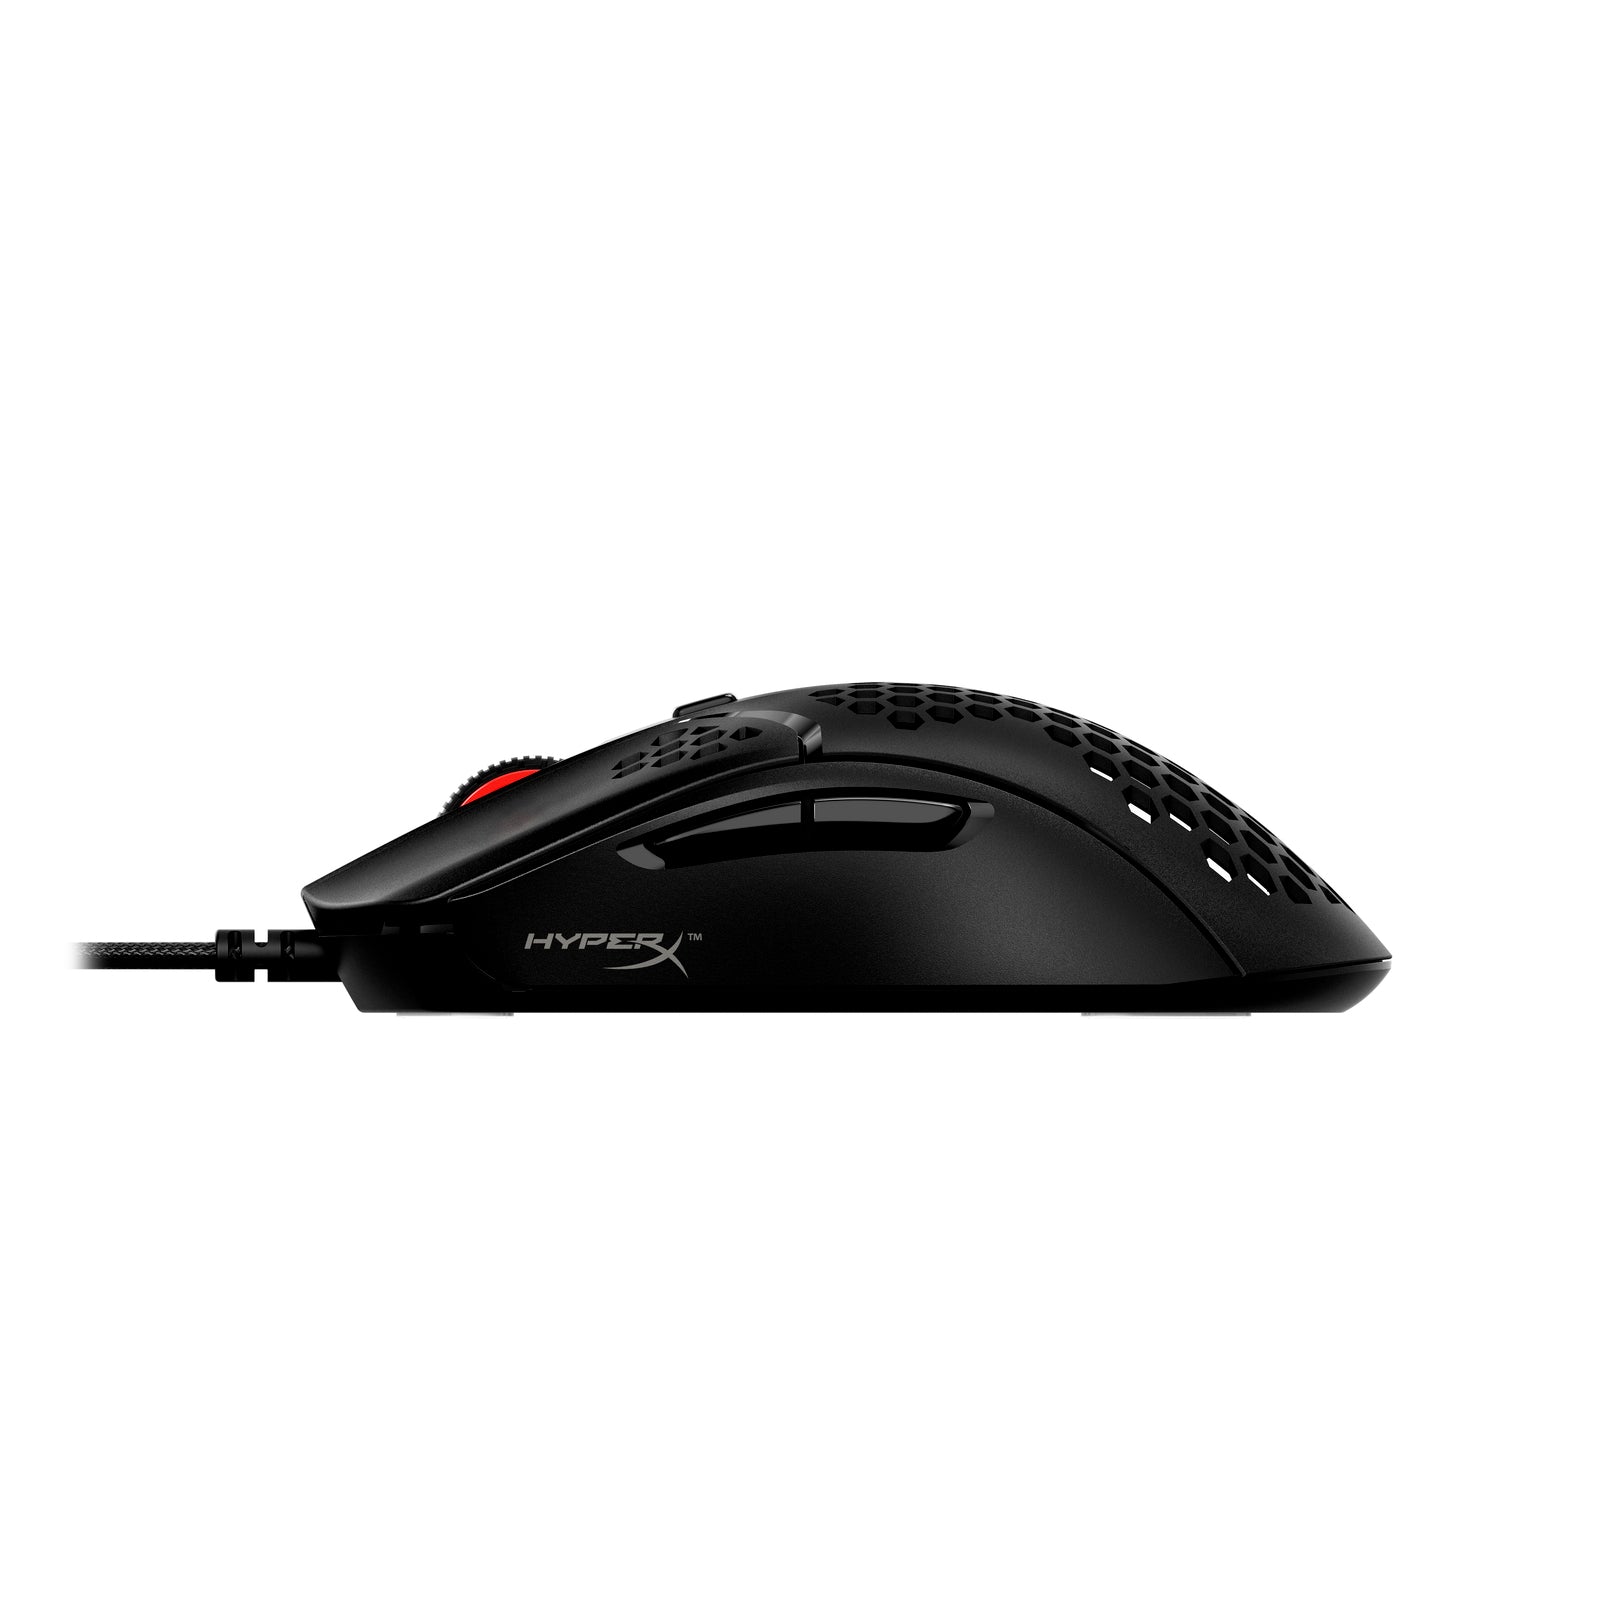 HyperX Pulsefire Haste Black Gaming Mouse - view from the left side